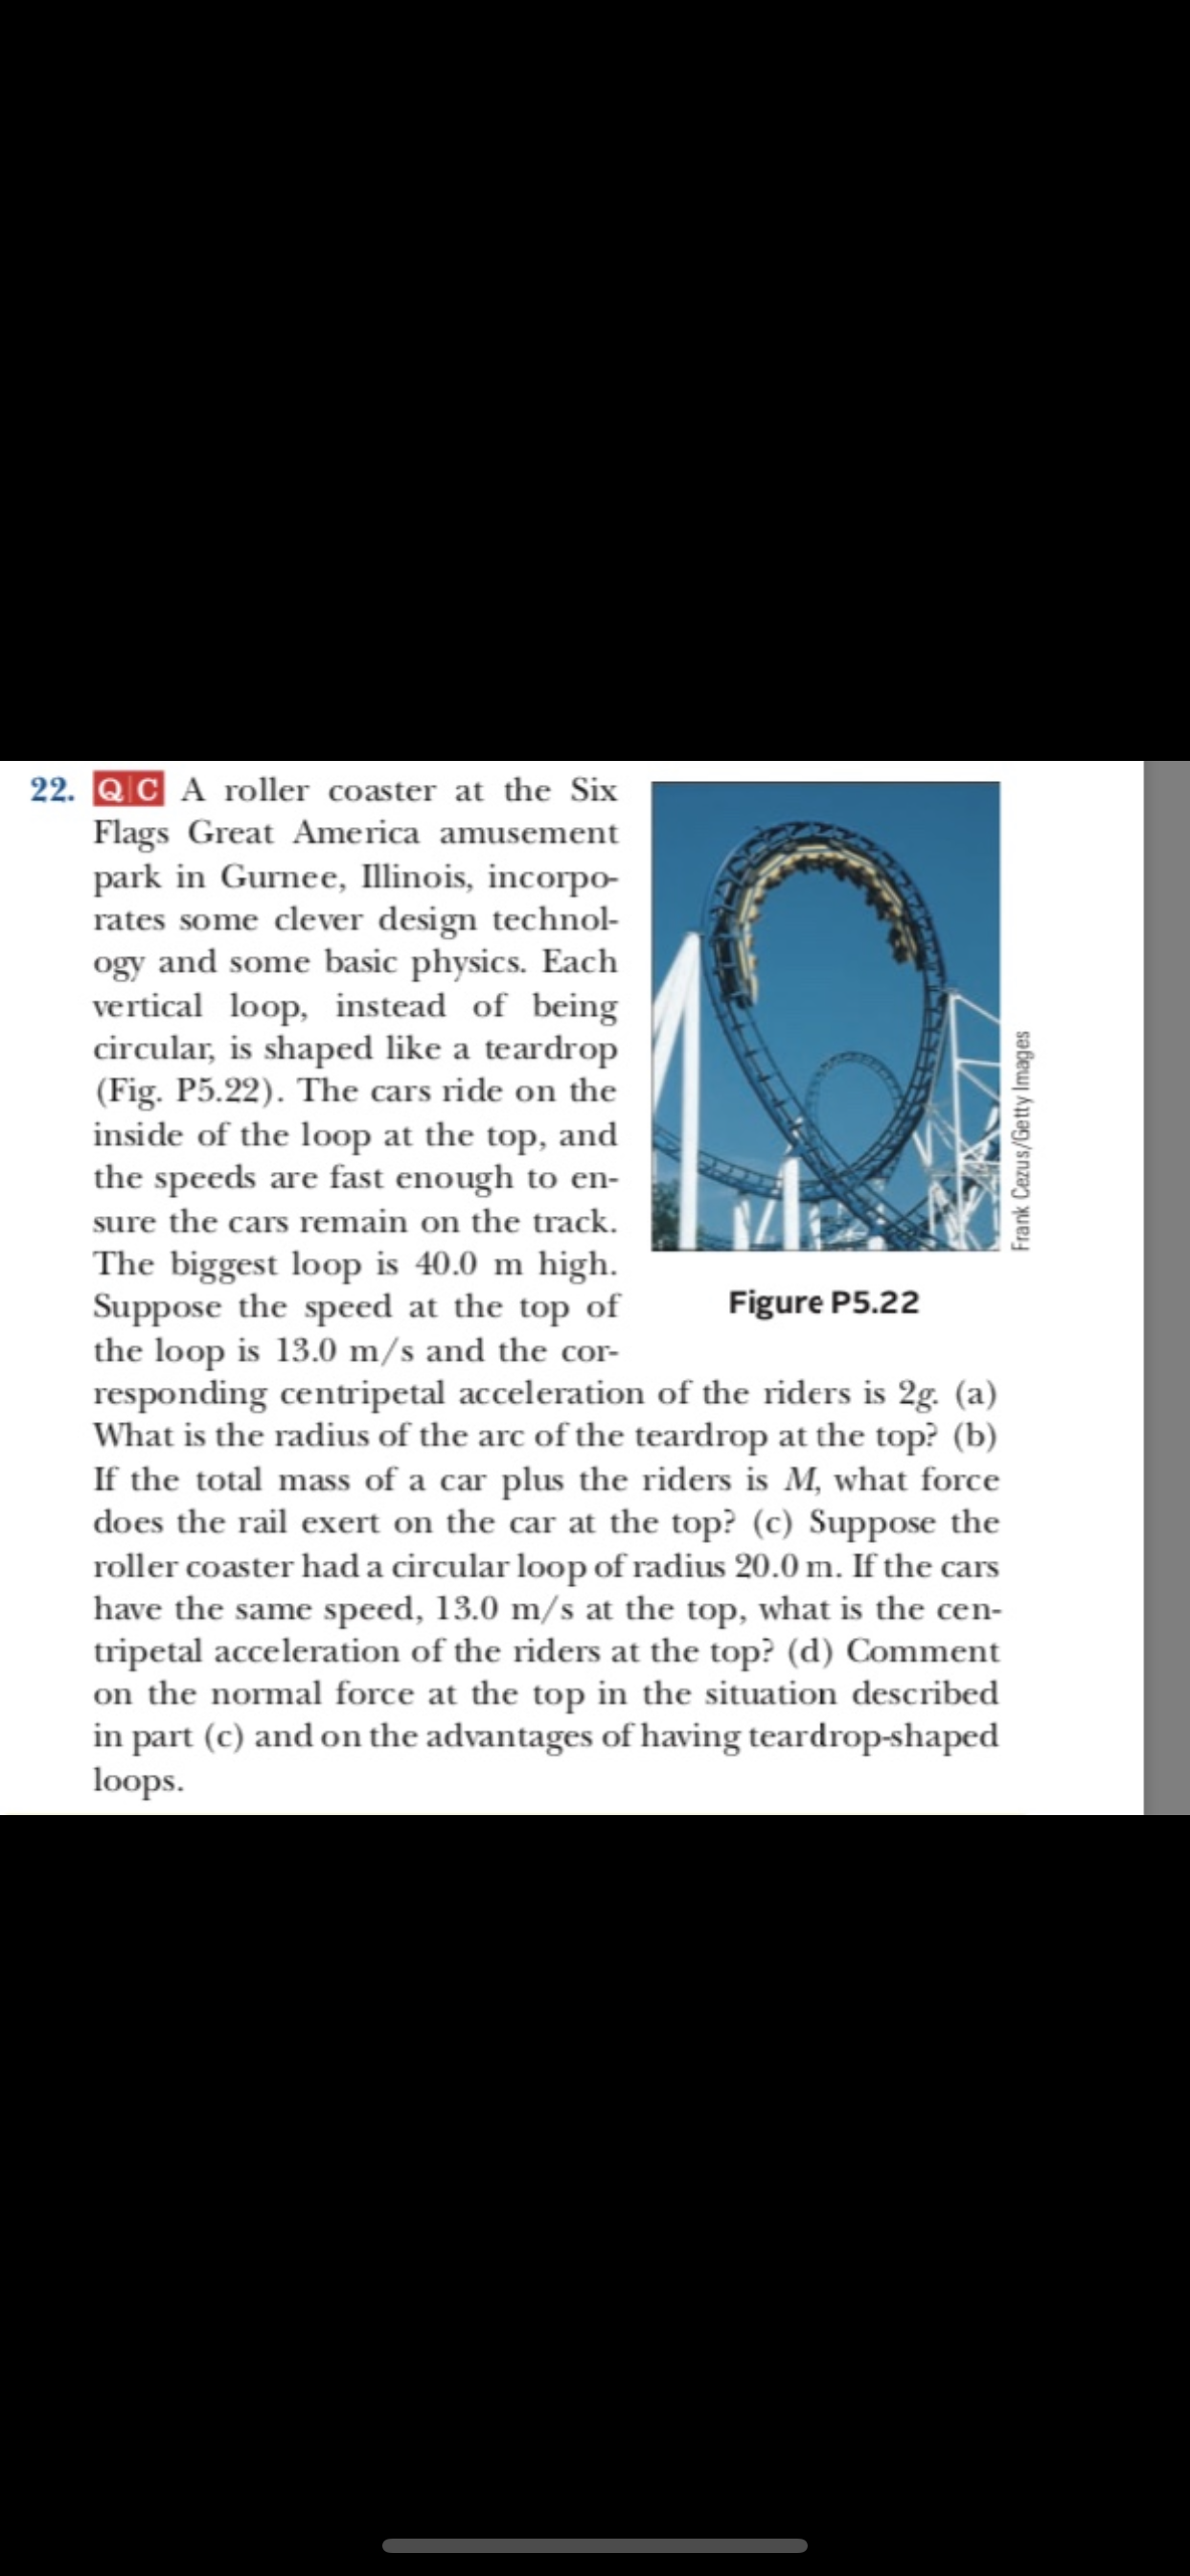 22. QC A roller coaster at the Six
Flags Great America amusement
park in Gurnee, llinois, incorpo
rates some clever design technol
ogy and some basic physics. Each
vertical loop, instead of being
circular, is shaped like a teardrop
(Fig. P5.22). The cars ride on the
inside of the loop at the top, and
the speeds are fast enough to en-
sure the cars remain on the track.
The biggest loop is 40.0 m high
Suppose the speed at the top of
the loop is 13.0 m/s and the cor
responding centripetal acceleration of the riders is 2g. (a)
What is the radius of the arc of the teardrop at the top? (b)
If the total mass of a car plus the riders is M, what force
does the rail exert on the car at the top? (c) Suppose the
roller coaster had a circular loop of radius 20.0 m. If the cars
have the same speed, 13.0 m/s at the top, what is the cen-
tripetal acceleration of the riders at the top? (d) Comment
on the normal force at the top in the situation described
in part (c) and on the advantages of having teardrop-shaped
loops
Figure P5.22
Frank Cezus/Getty Images
